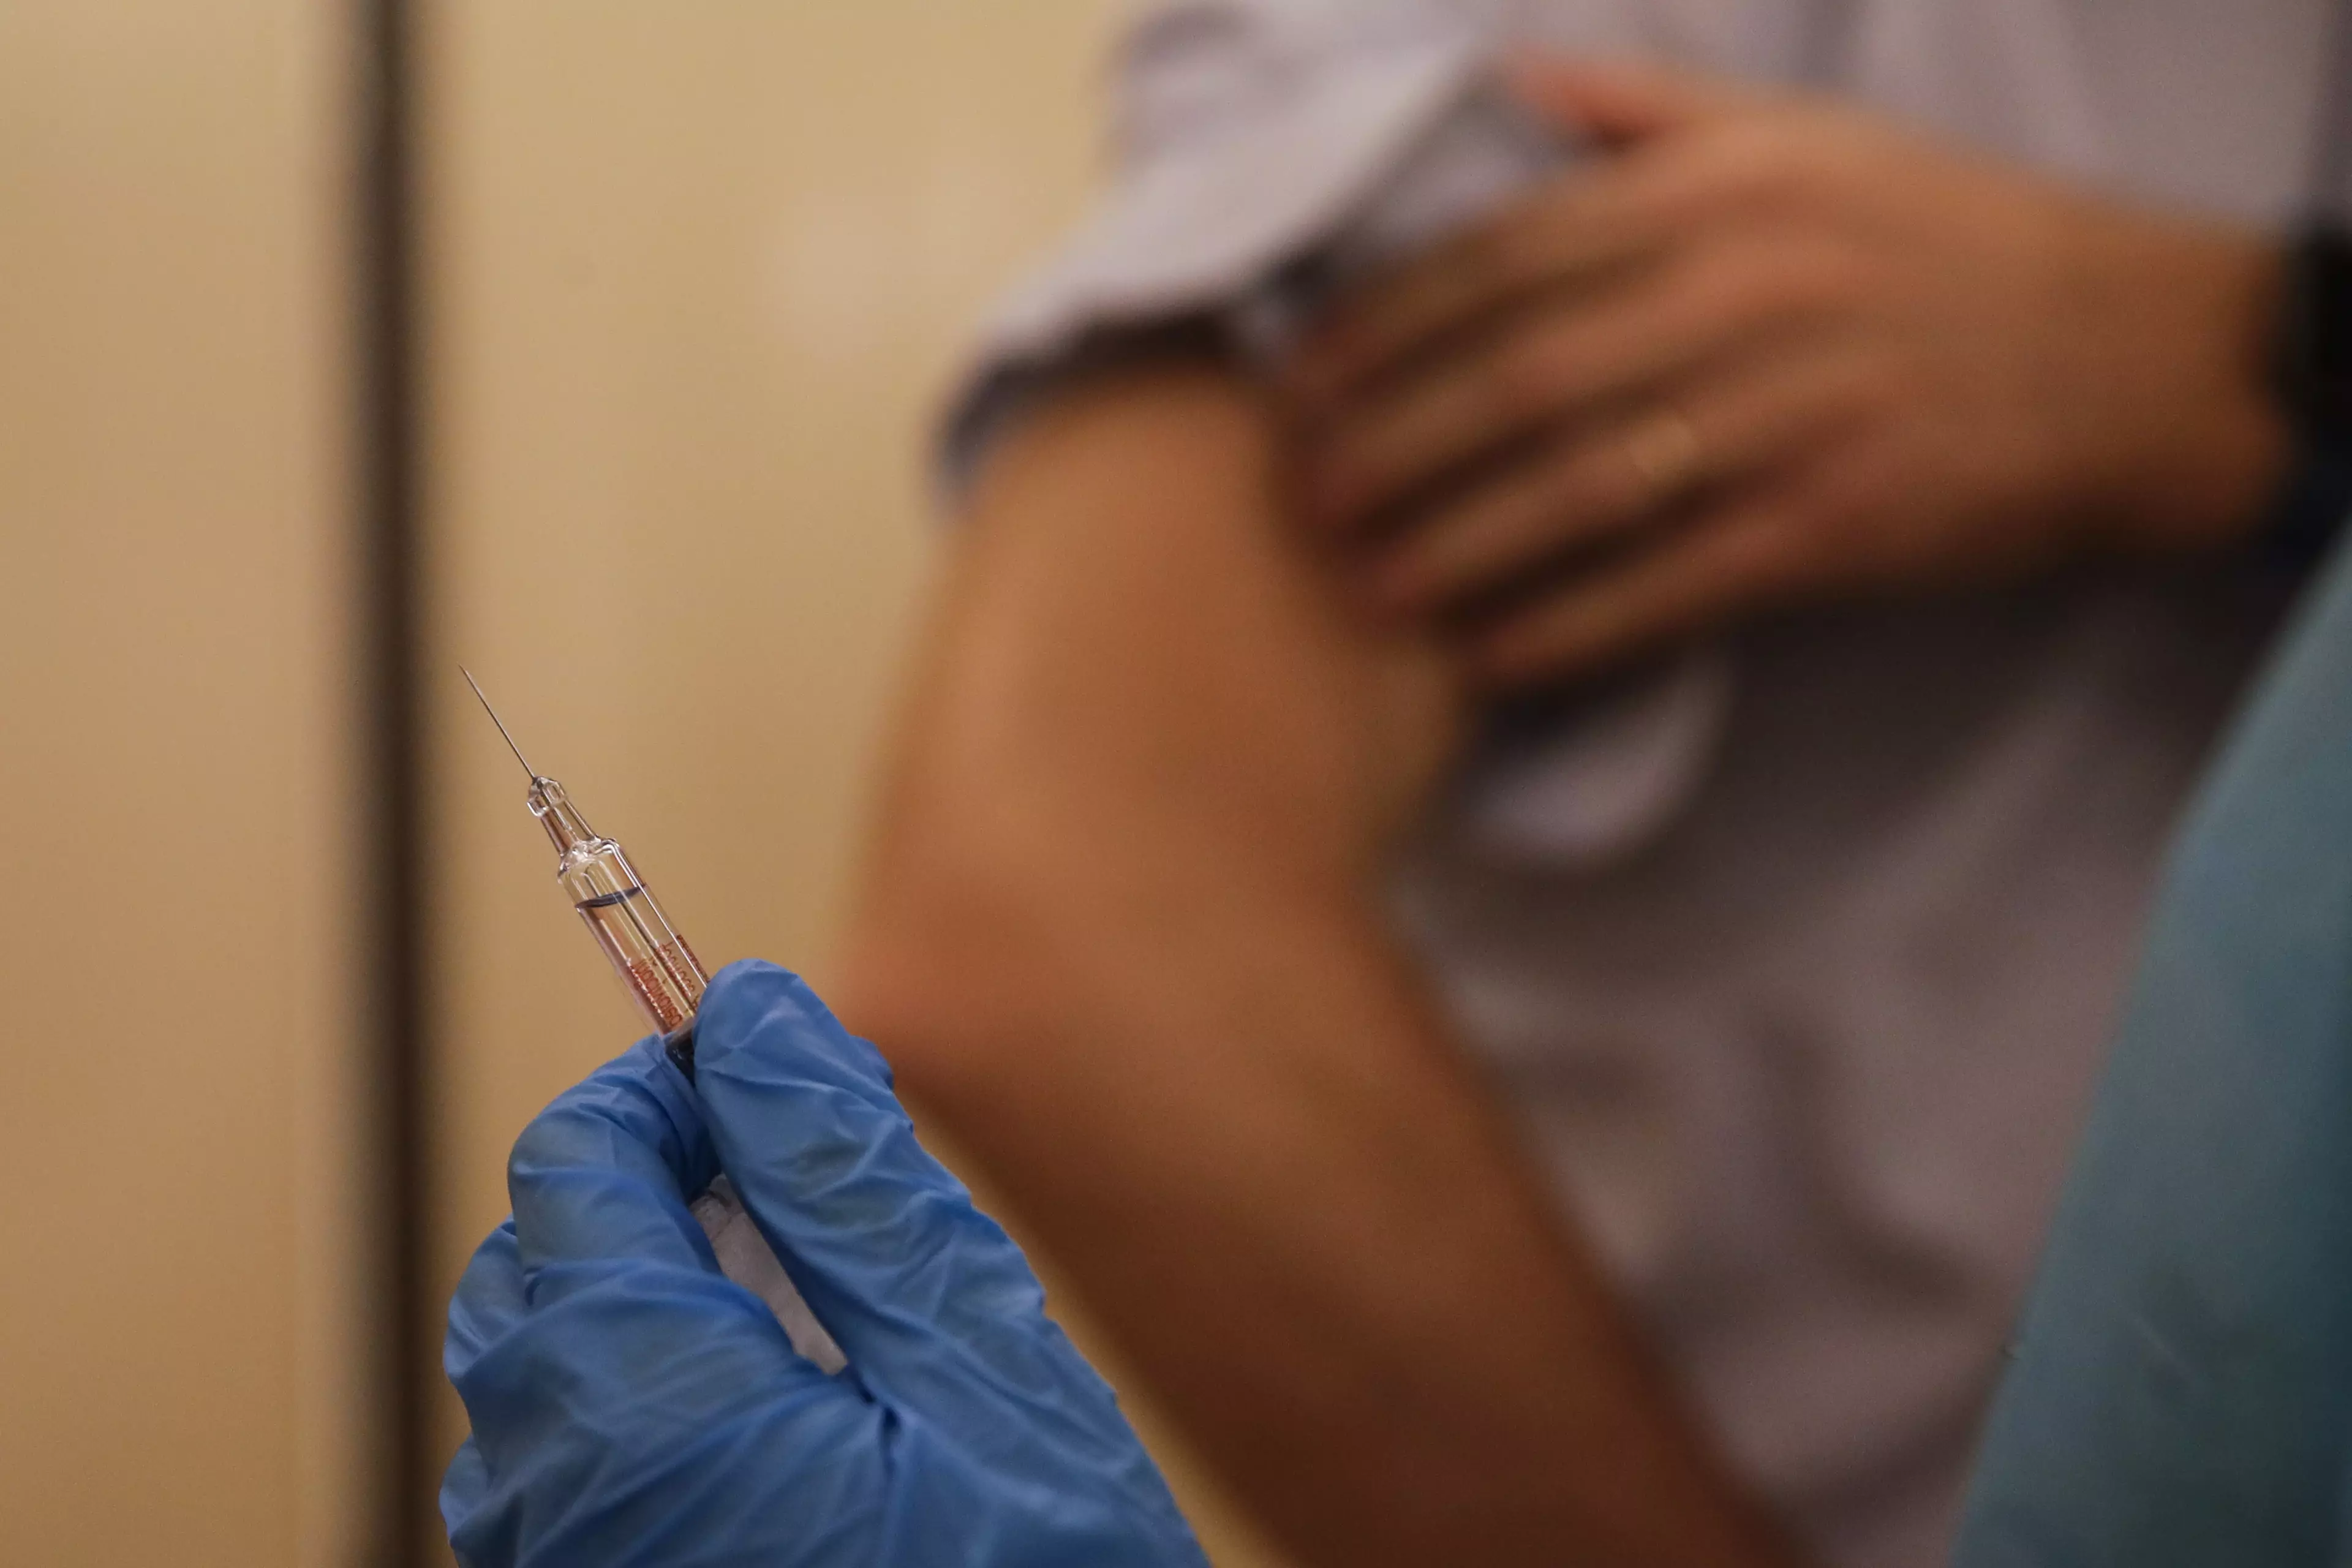 The UK has ordered 30 million doses of the vaccine.